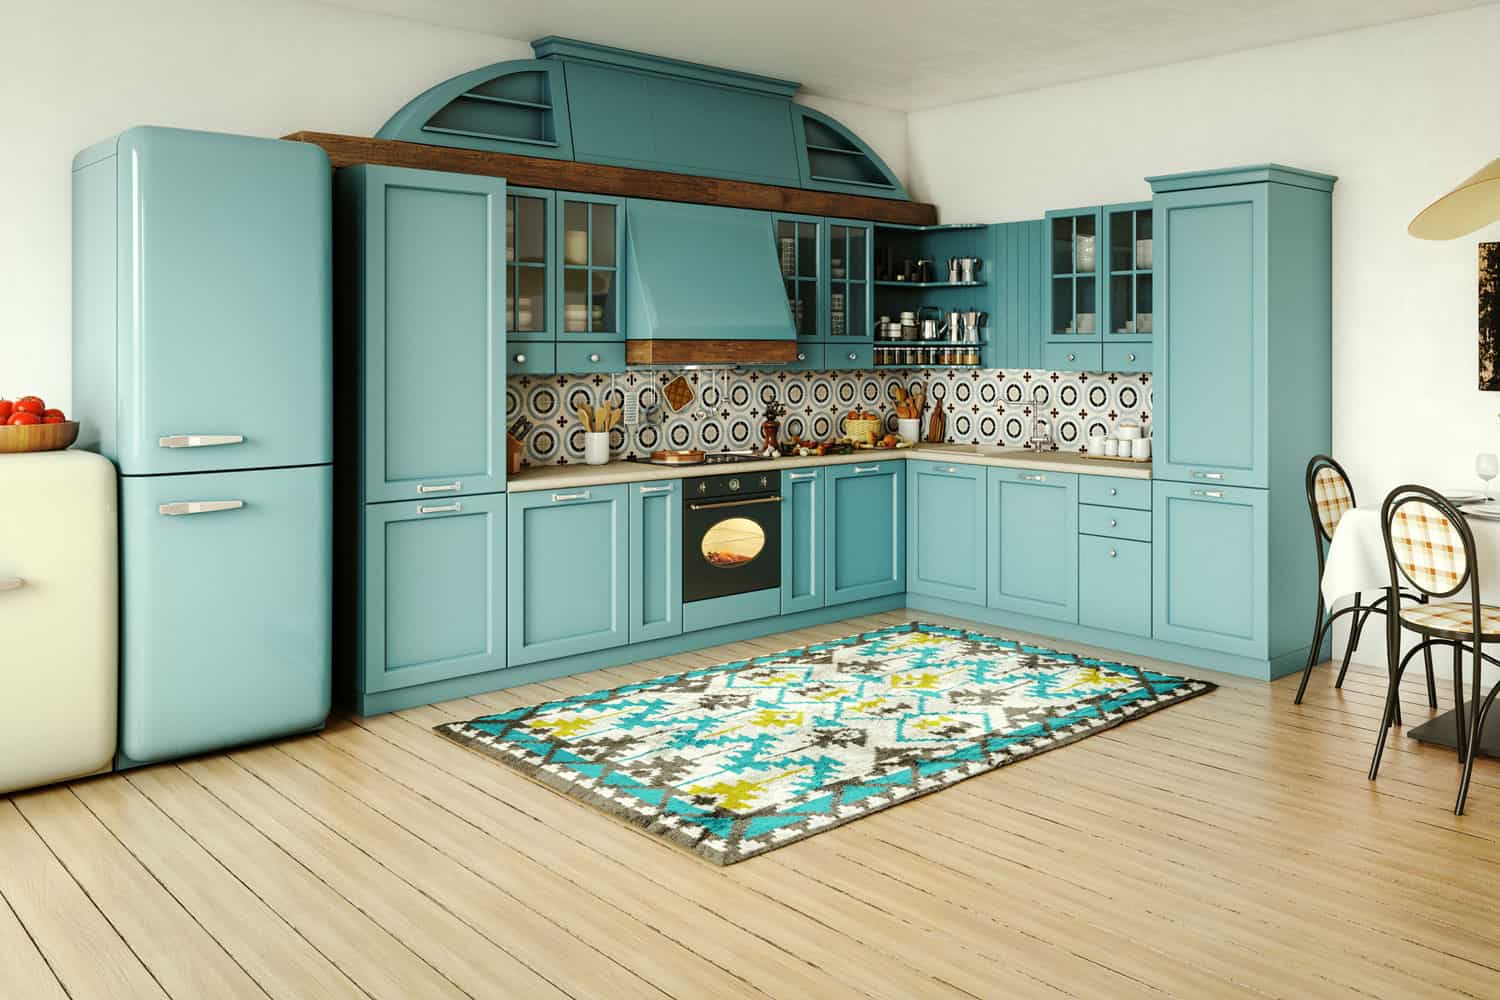 Bright ambiance color of mint green kitchen cabinets